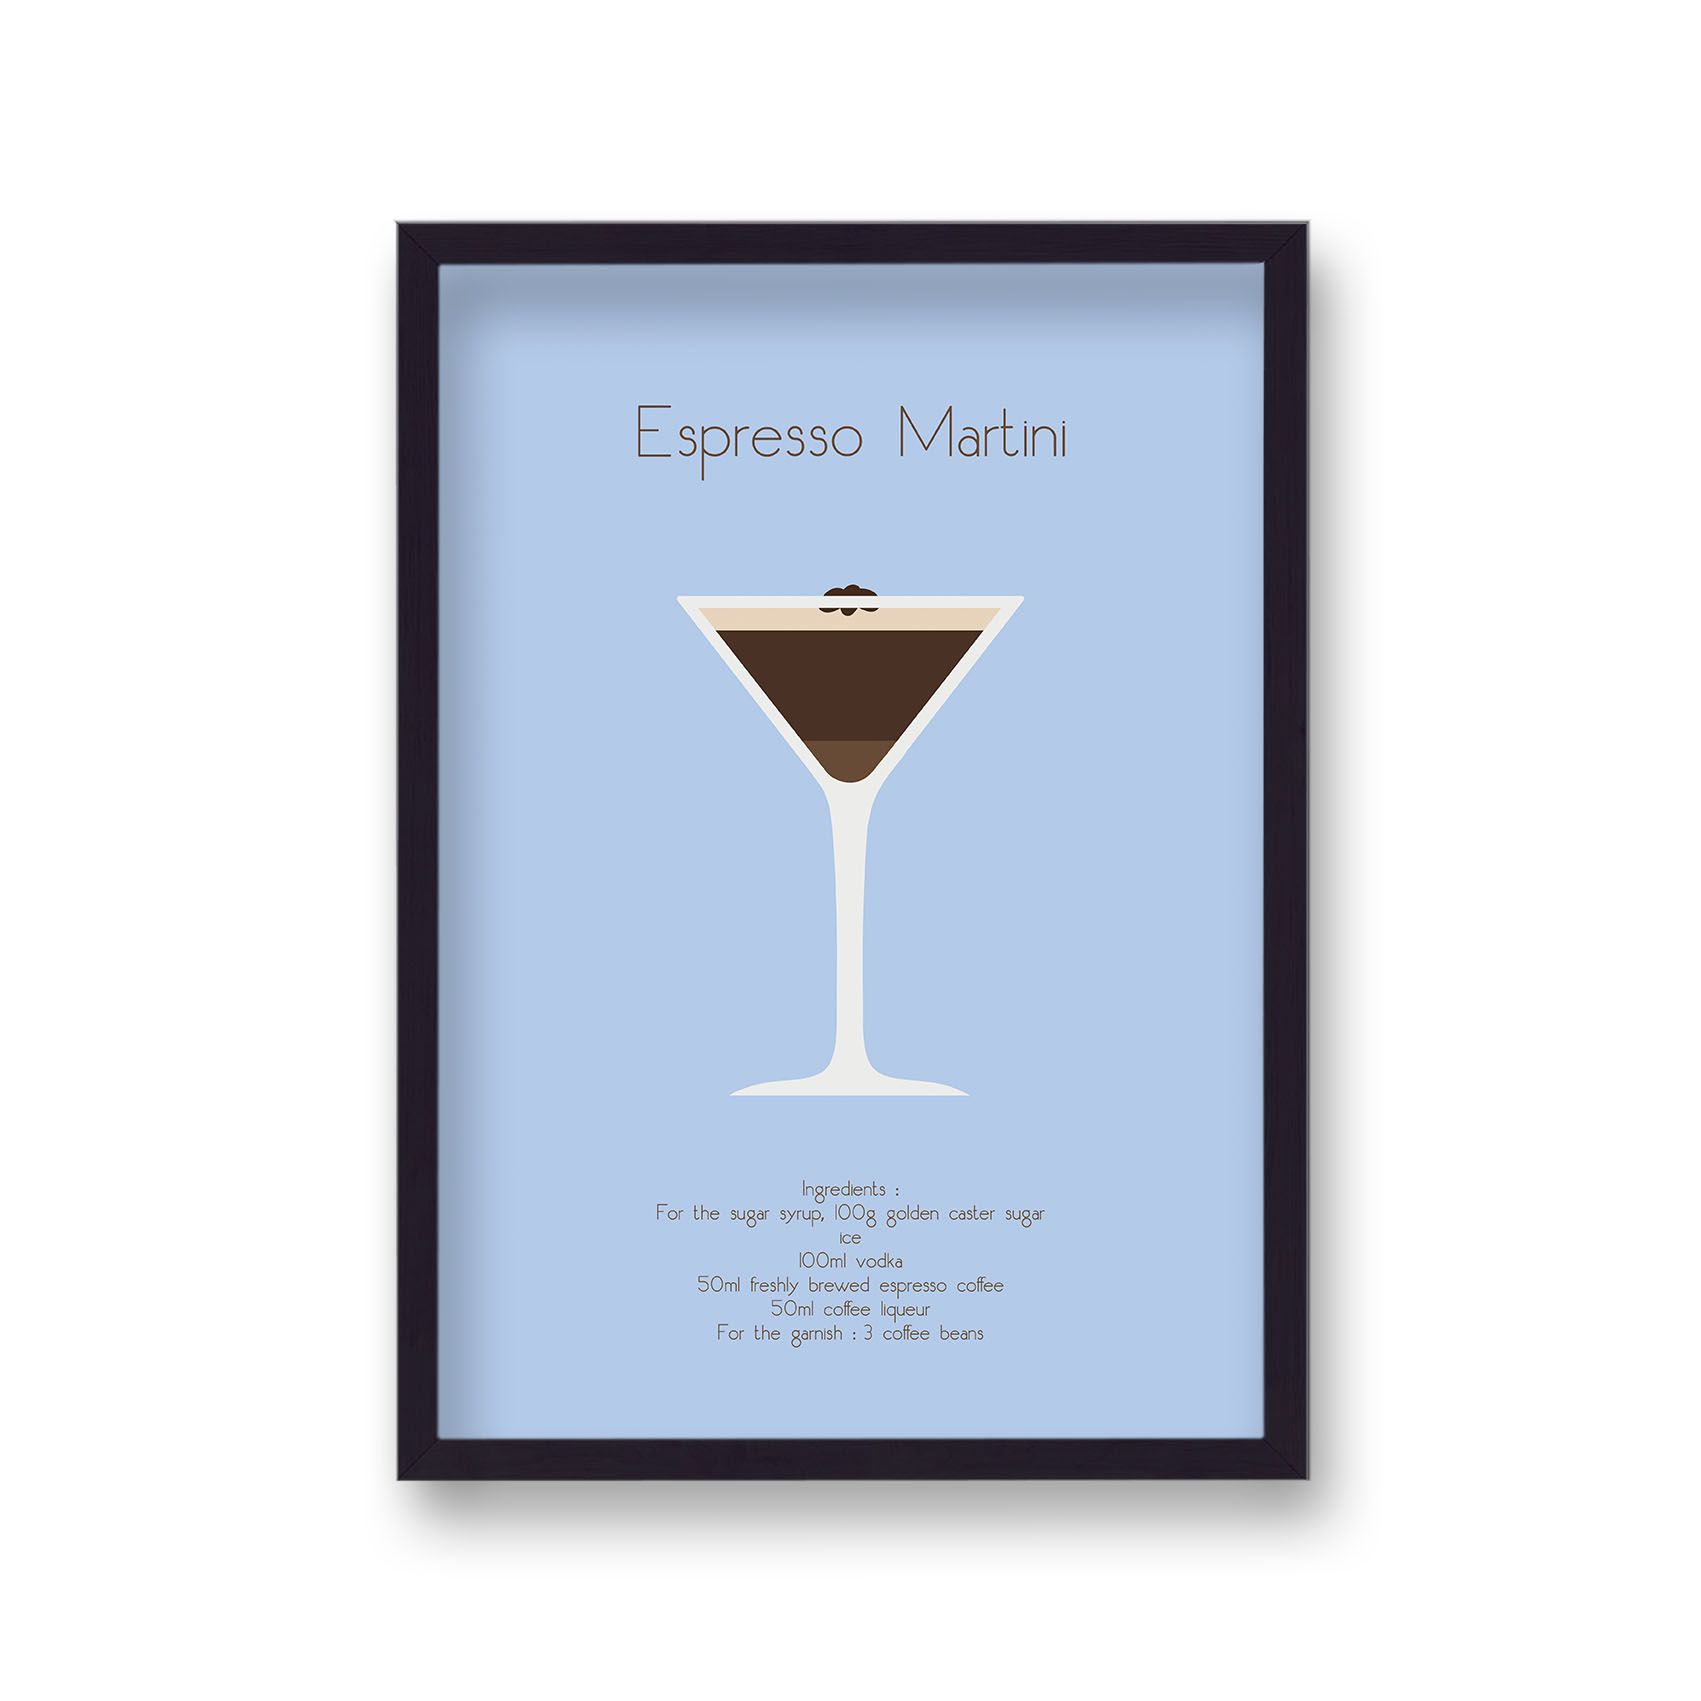 Printed on 240gsm Matte Ultra white paper, offering a smooth finish with ultra vivid colours. All of our frames are FSC certified and handmade in the UK by our qualified framers.The frames are professionally finished and ready to hang. We use Clarity + premium synthetic glazing. The wood measures 20mm face x 22mm depth.